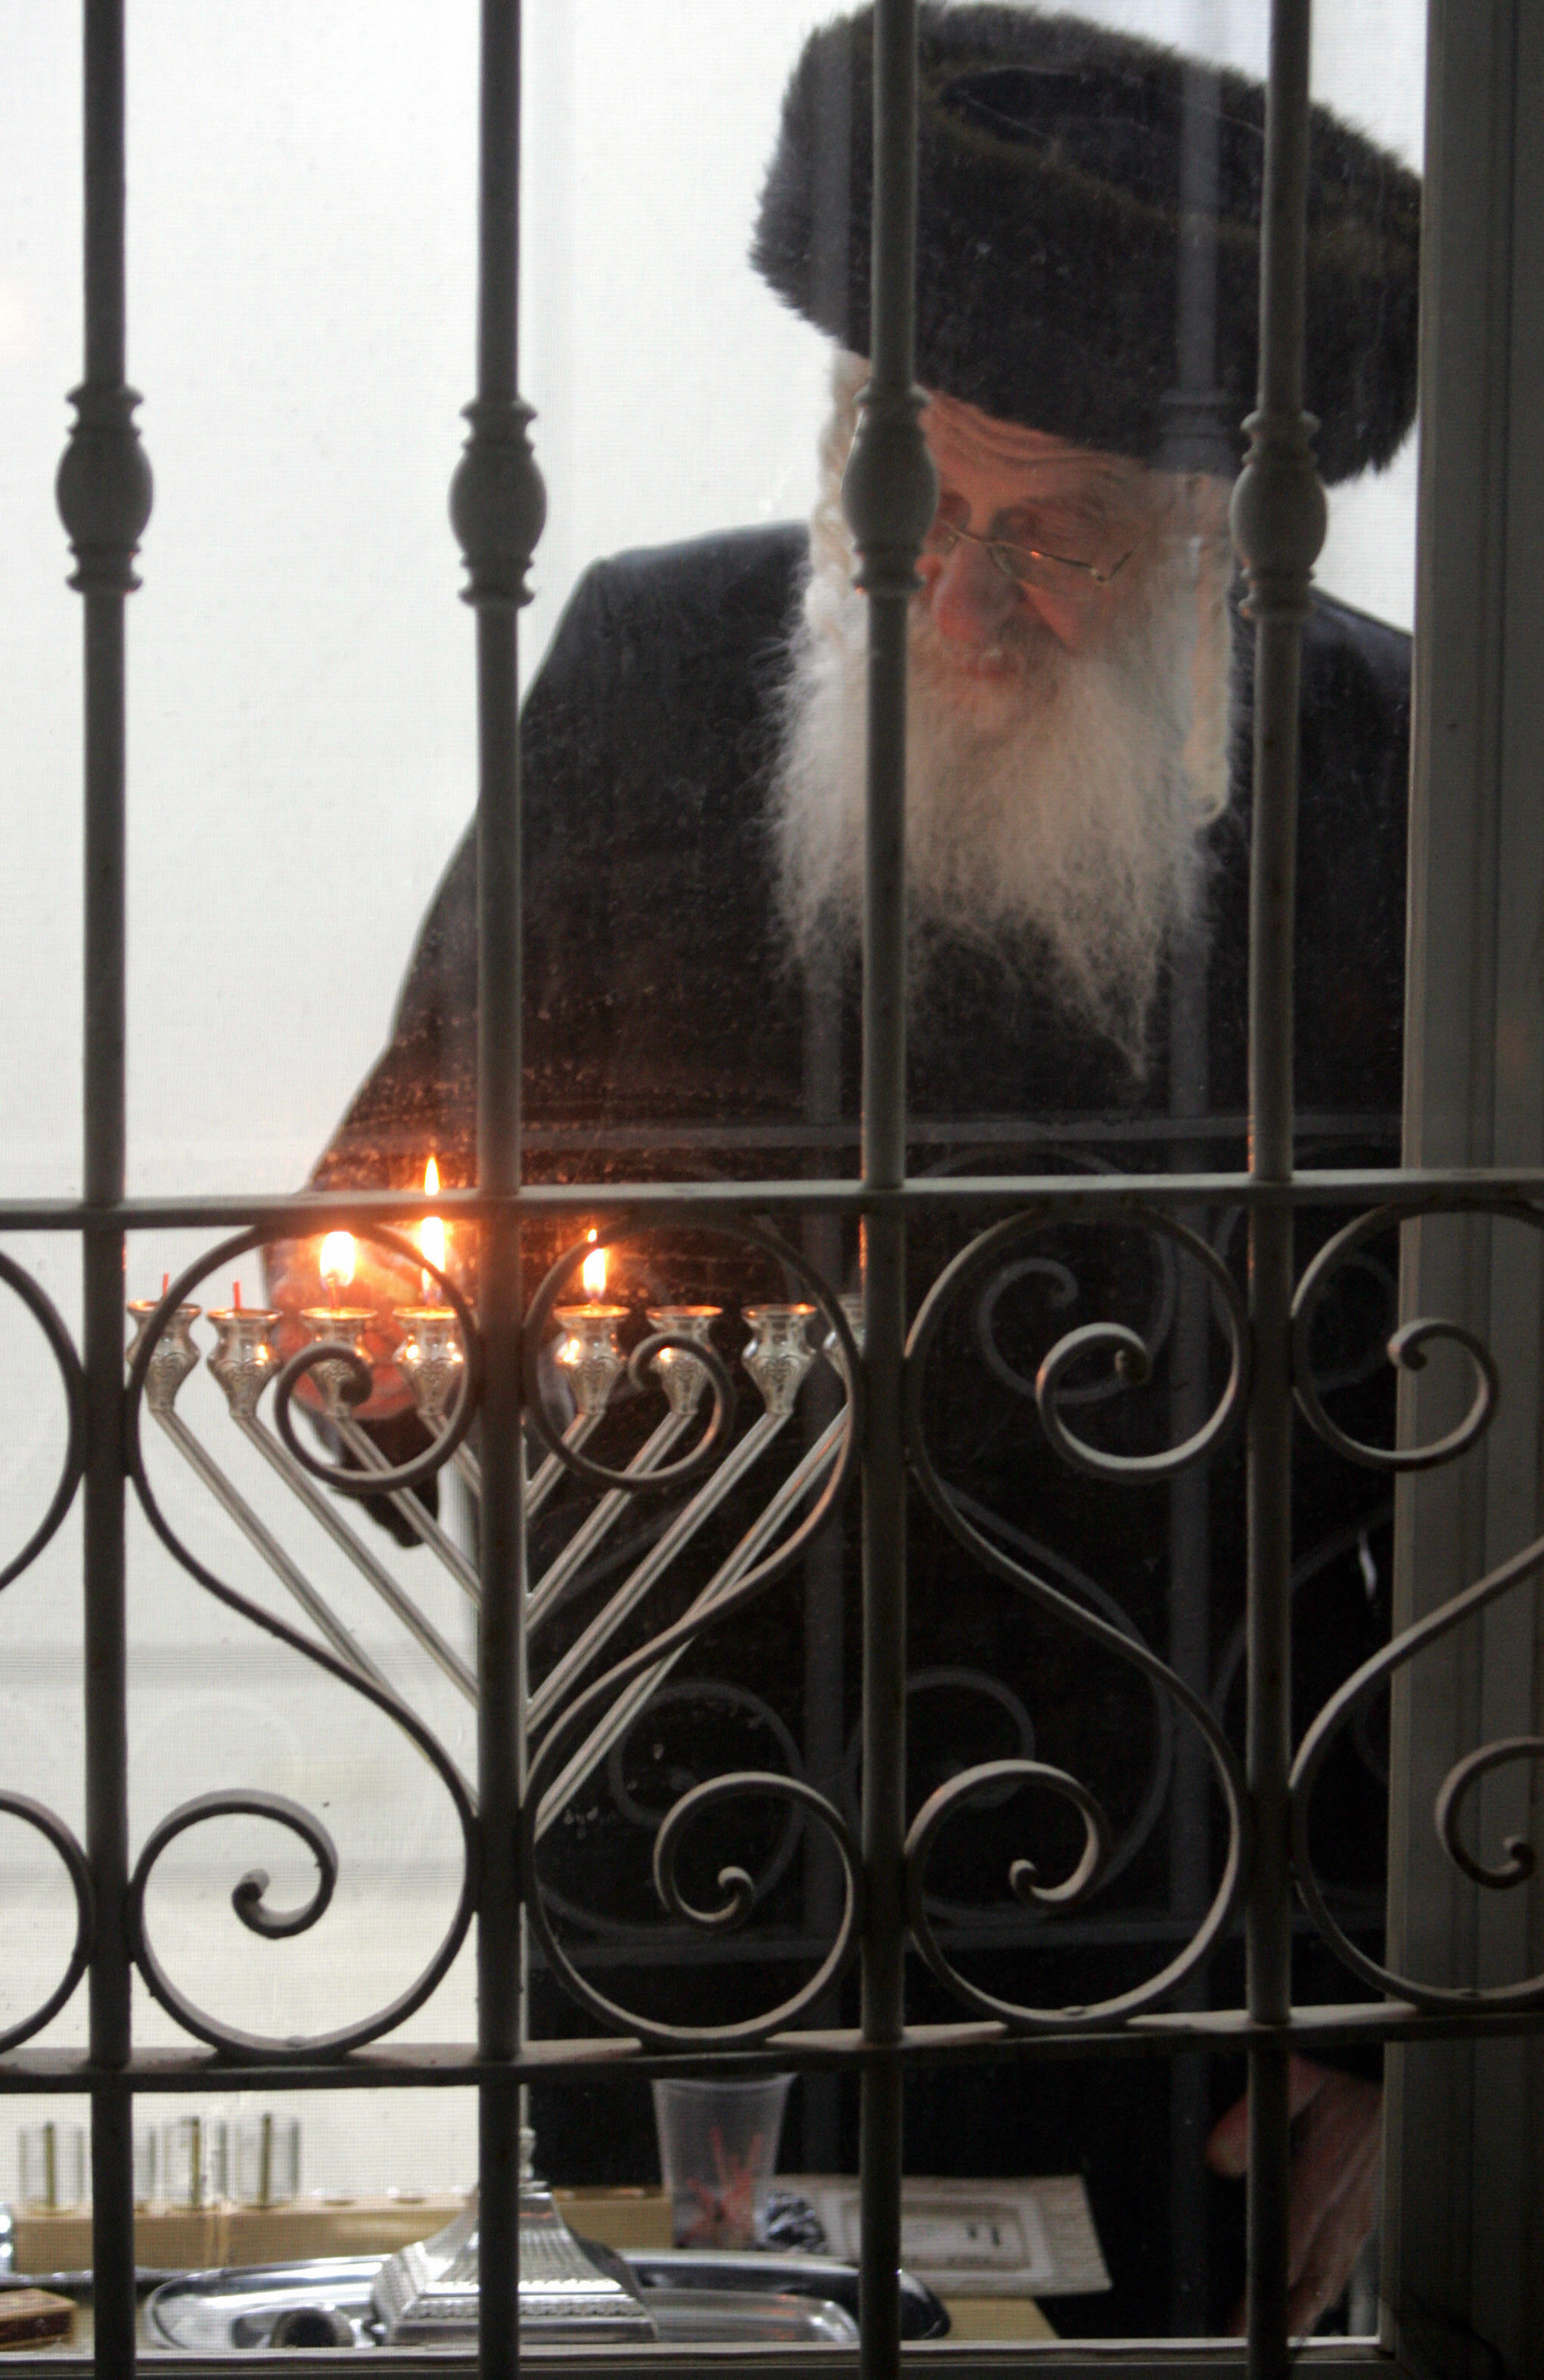 An Ultra-Orthodox Jewish man lights the candles of the fifth night of the Jewish holiday of Hanukah, in the ultra-Orthodox neighborhood of Mea Shearim in Jerusalem. (MENAHEM KAHANA—AFP/Getty Images)